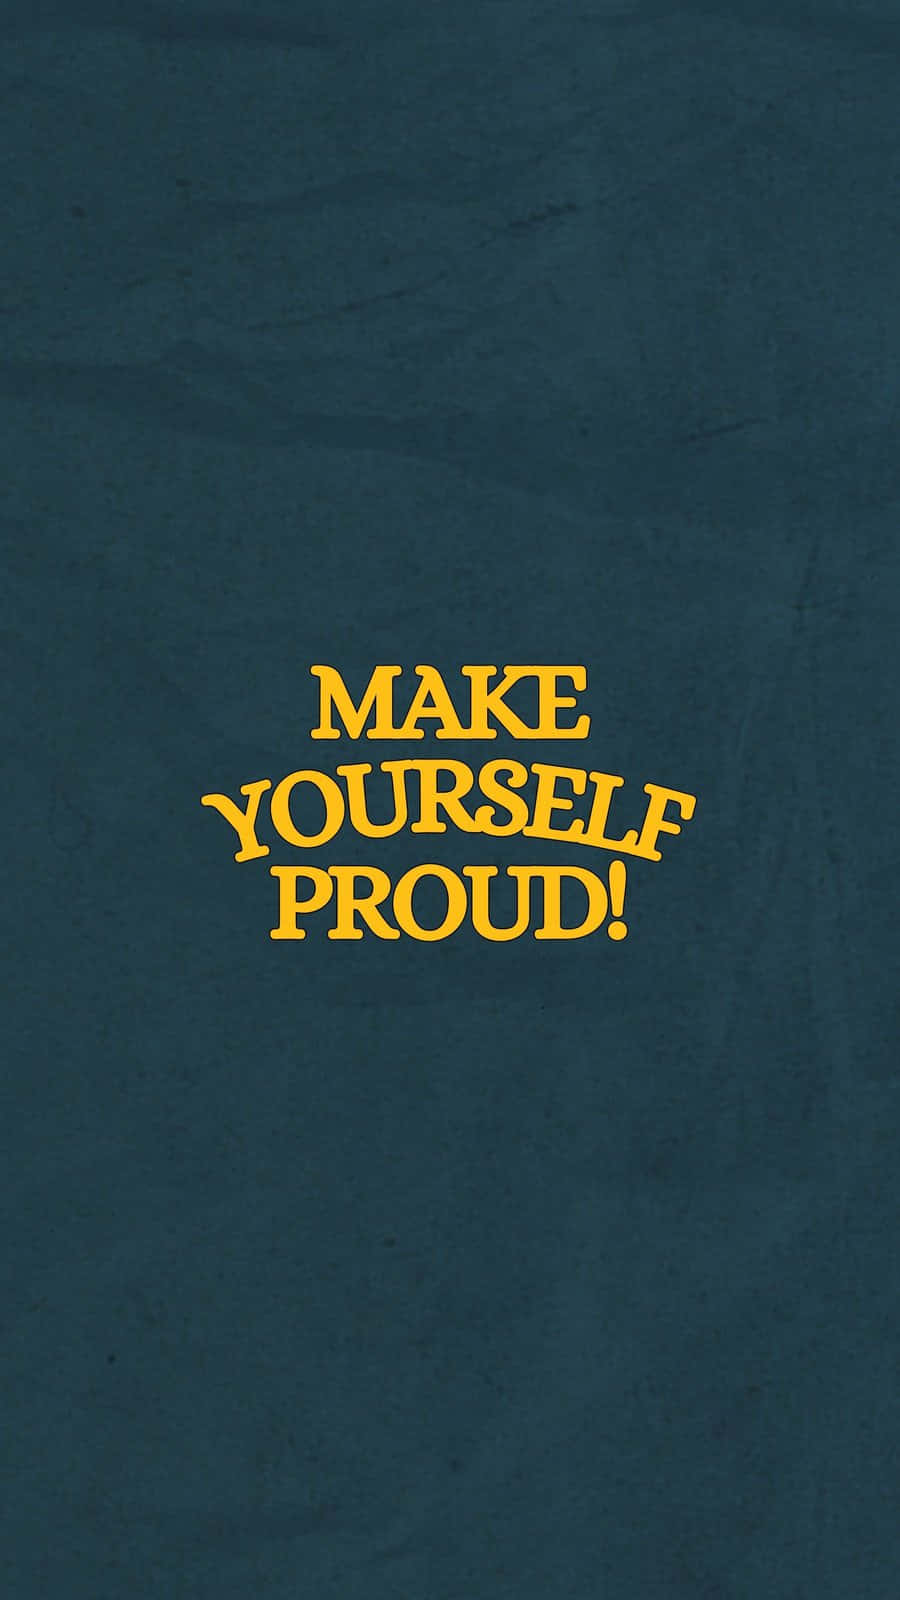 Make Yourself Proud Inspirational Quote Wallpaper